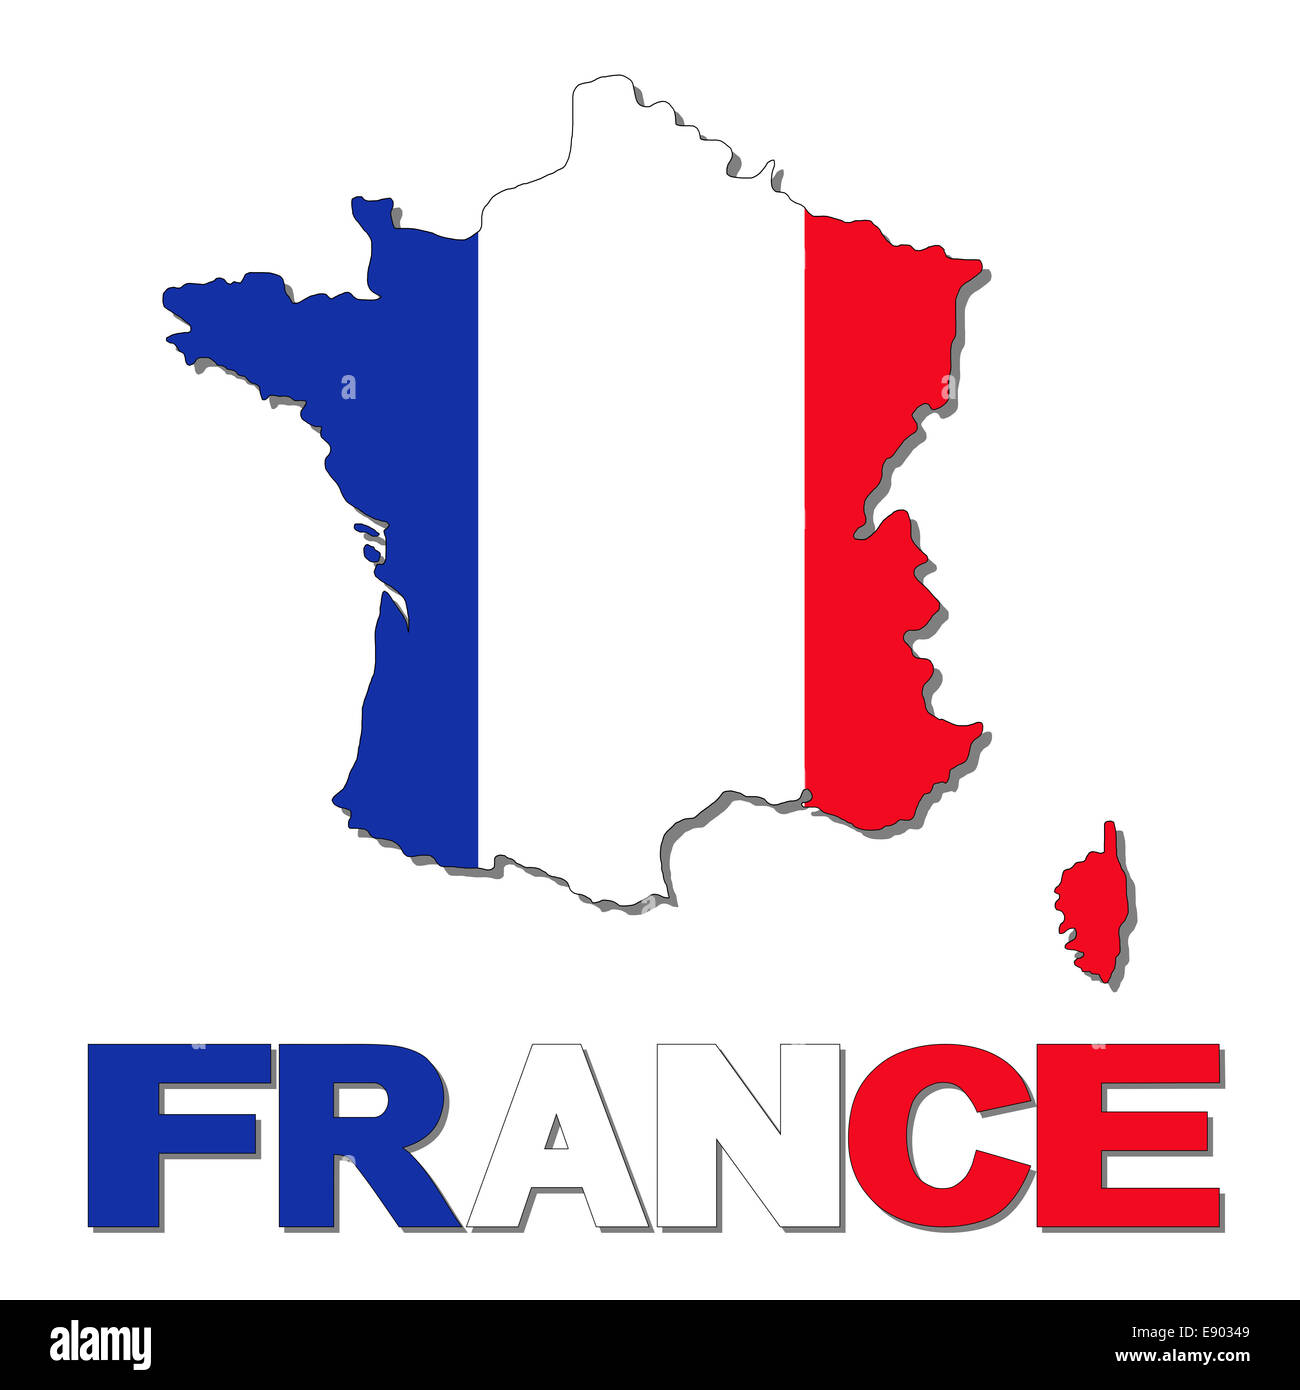 France map flag and text illustration Stock Photo